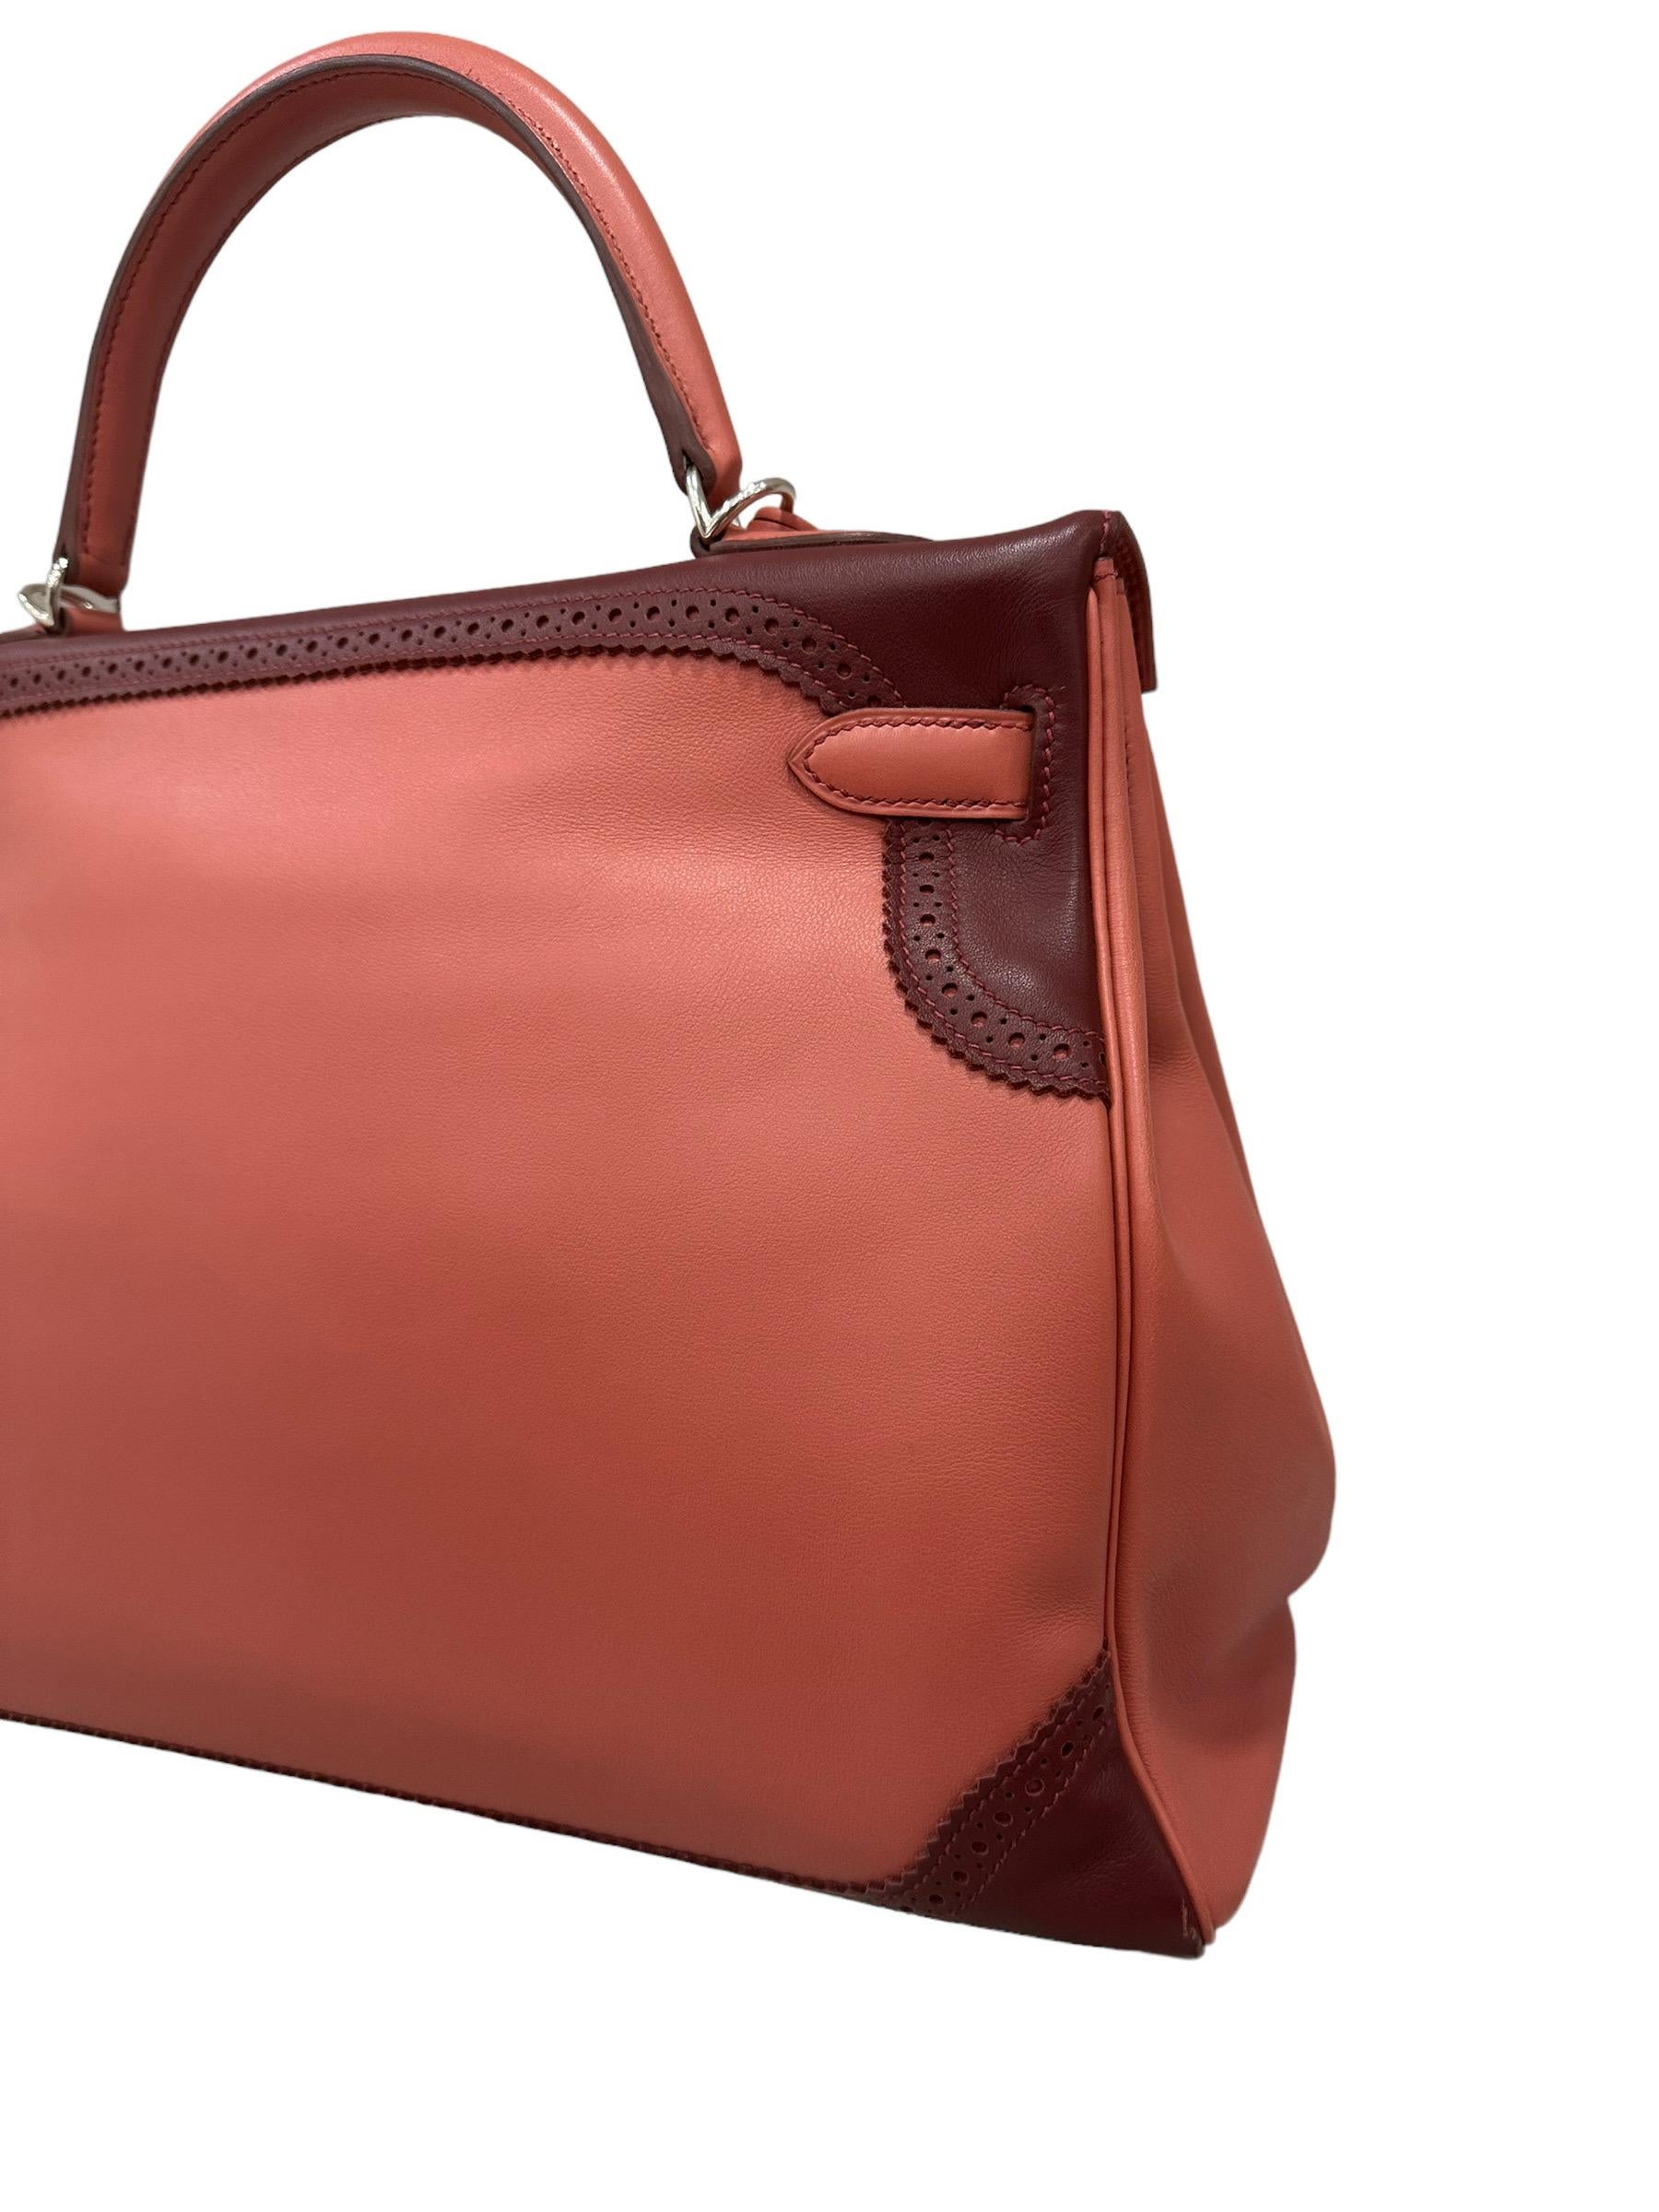 2012 Hermès Kelly 35 Ghillies Evercalf Rose Texas/Rouge H For Sale 1